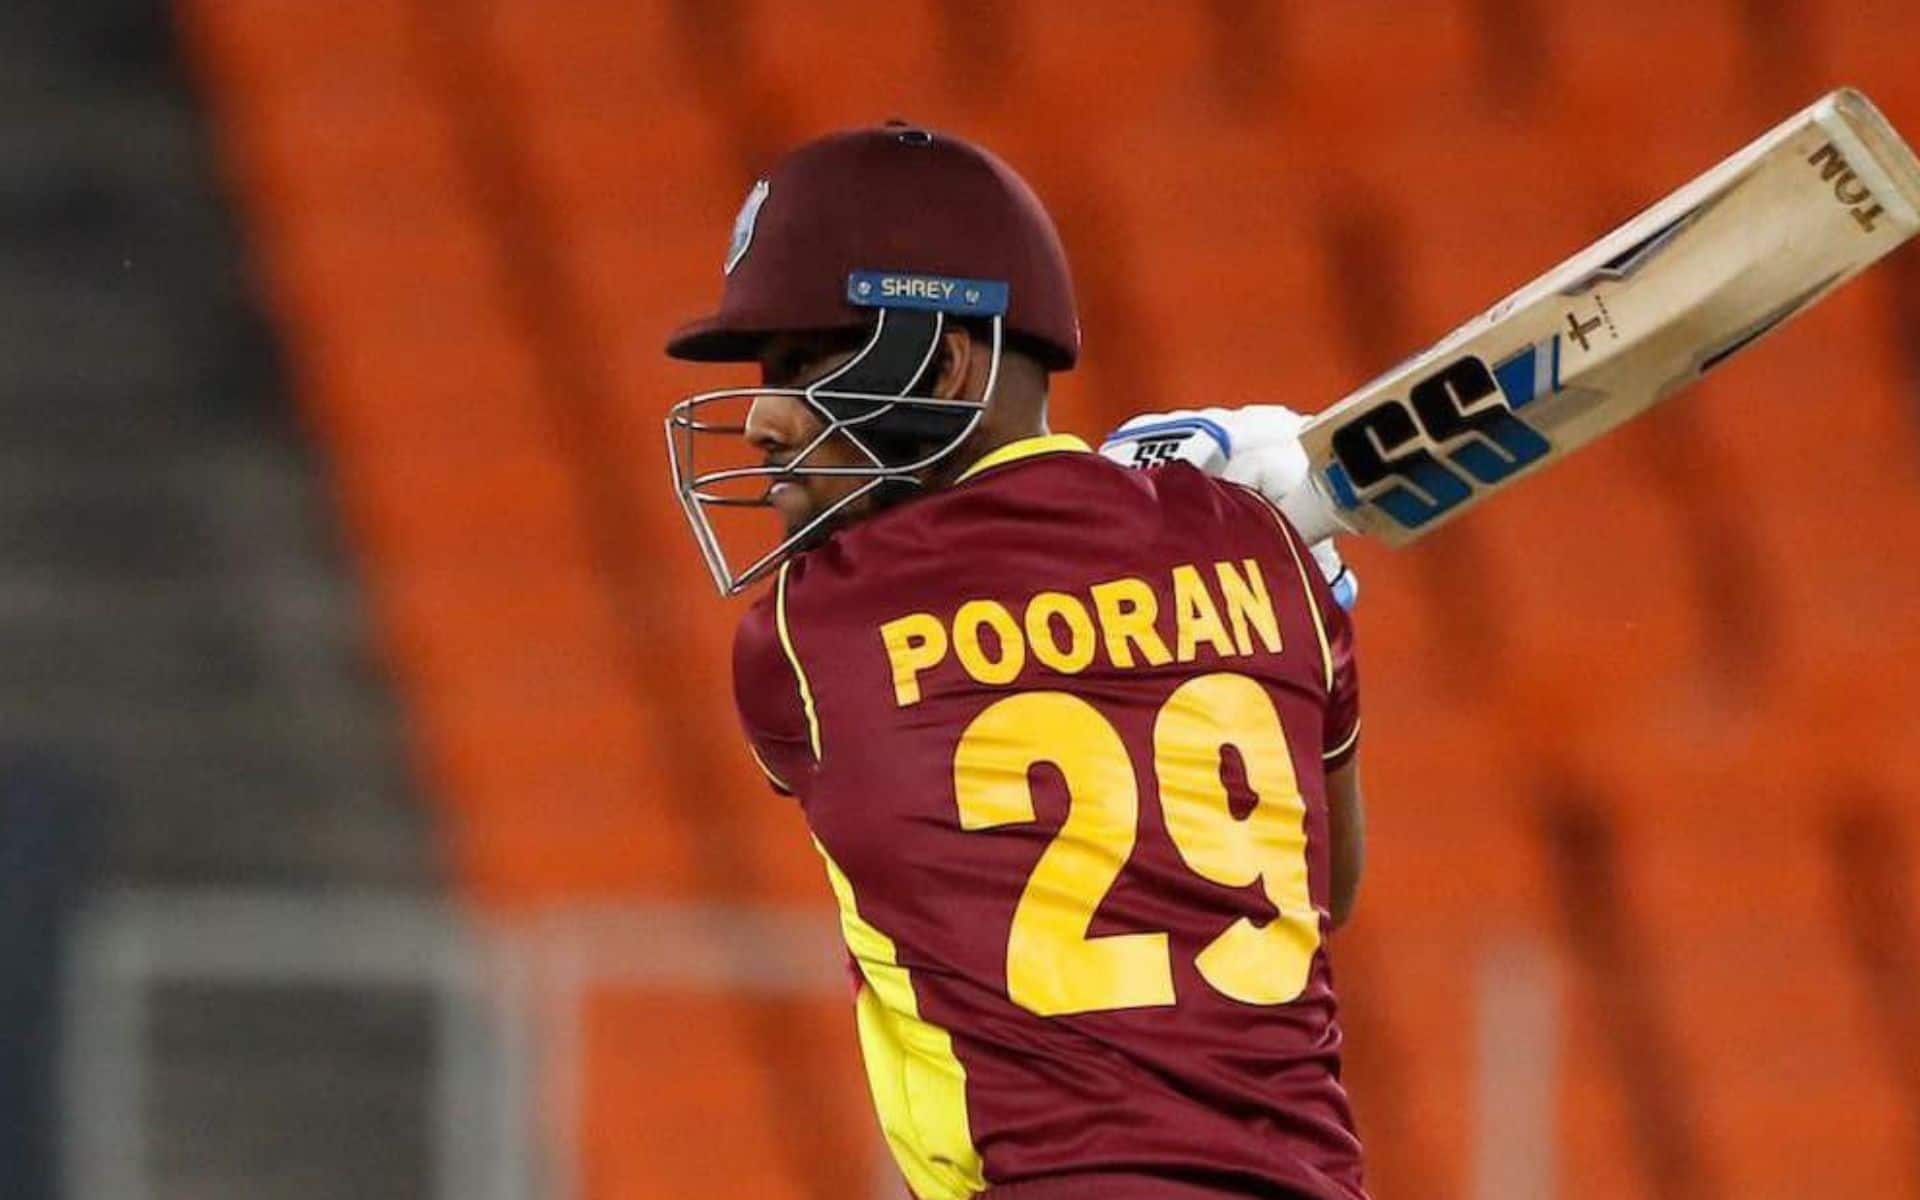 Nicholas Pooran will be crucial for MINY in the match [X]